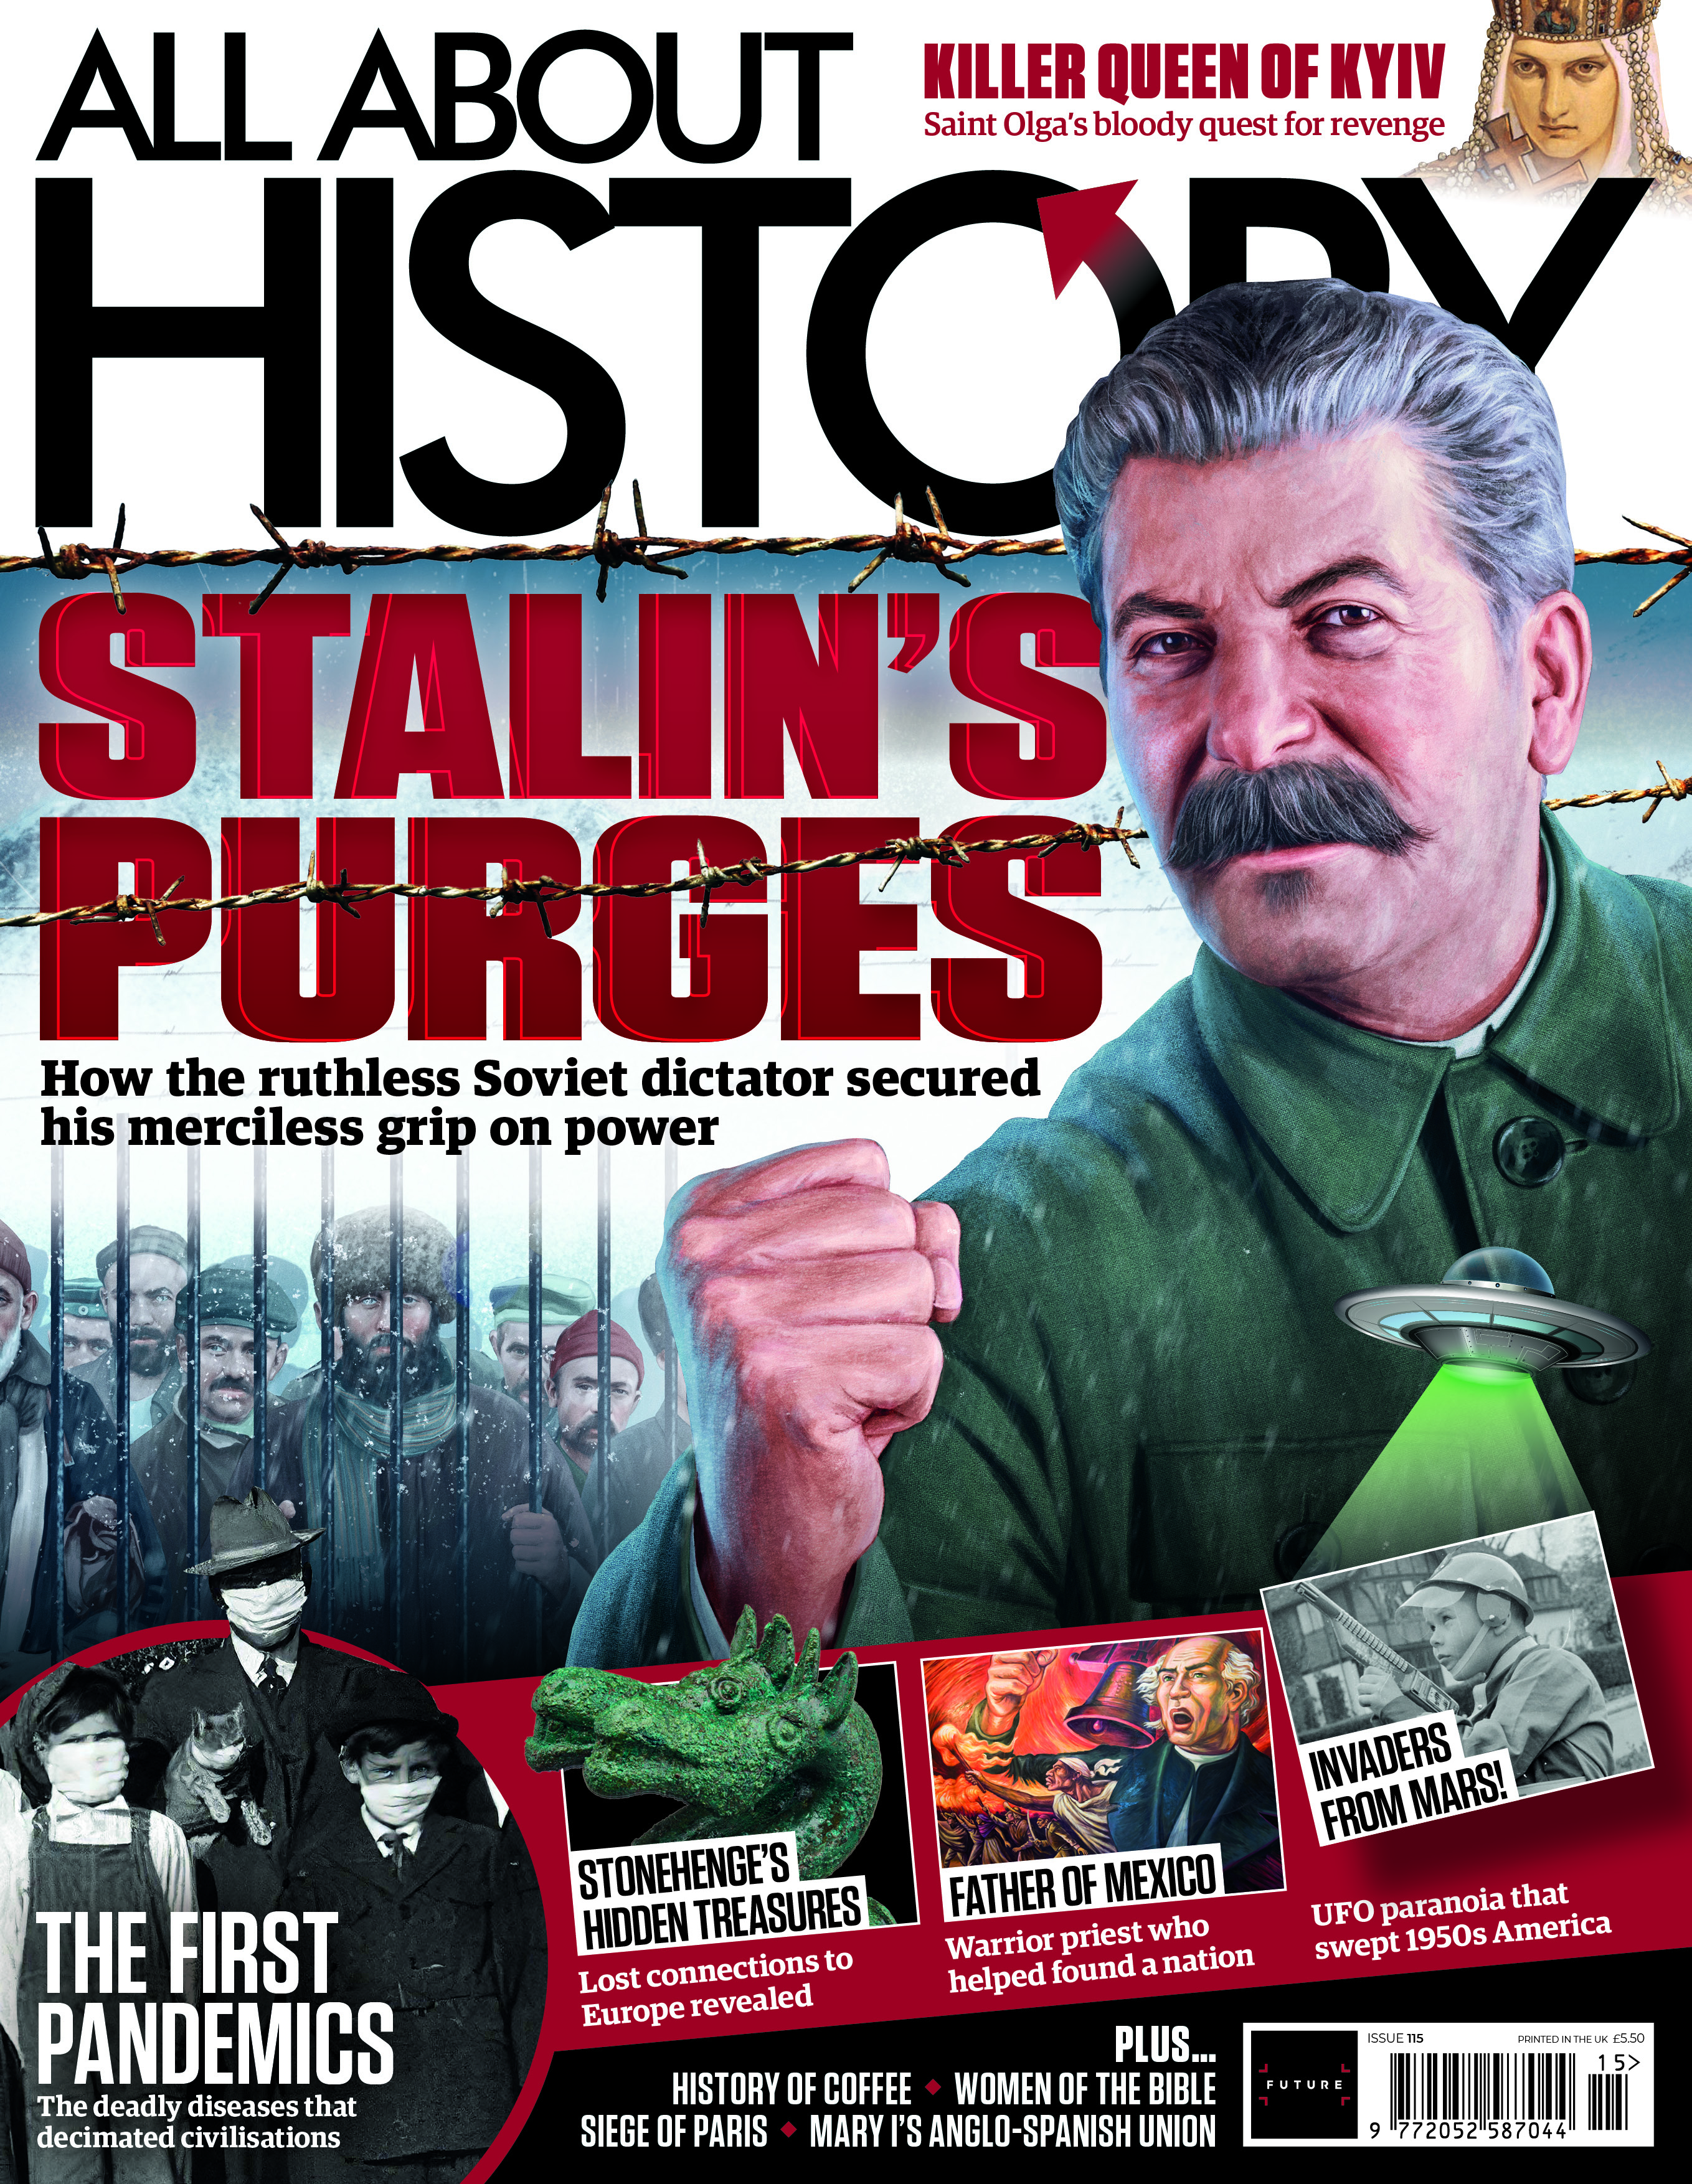 All about history 115 covers